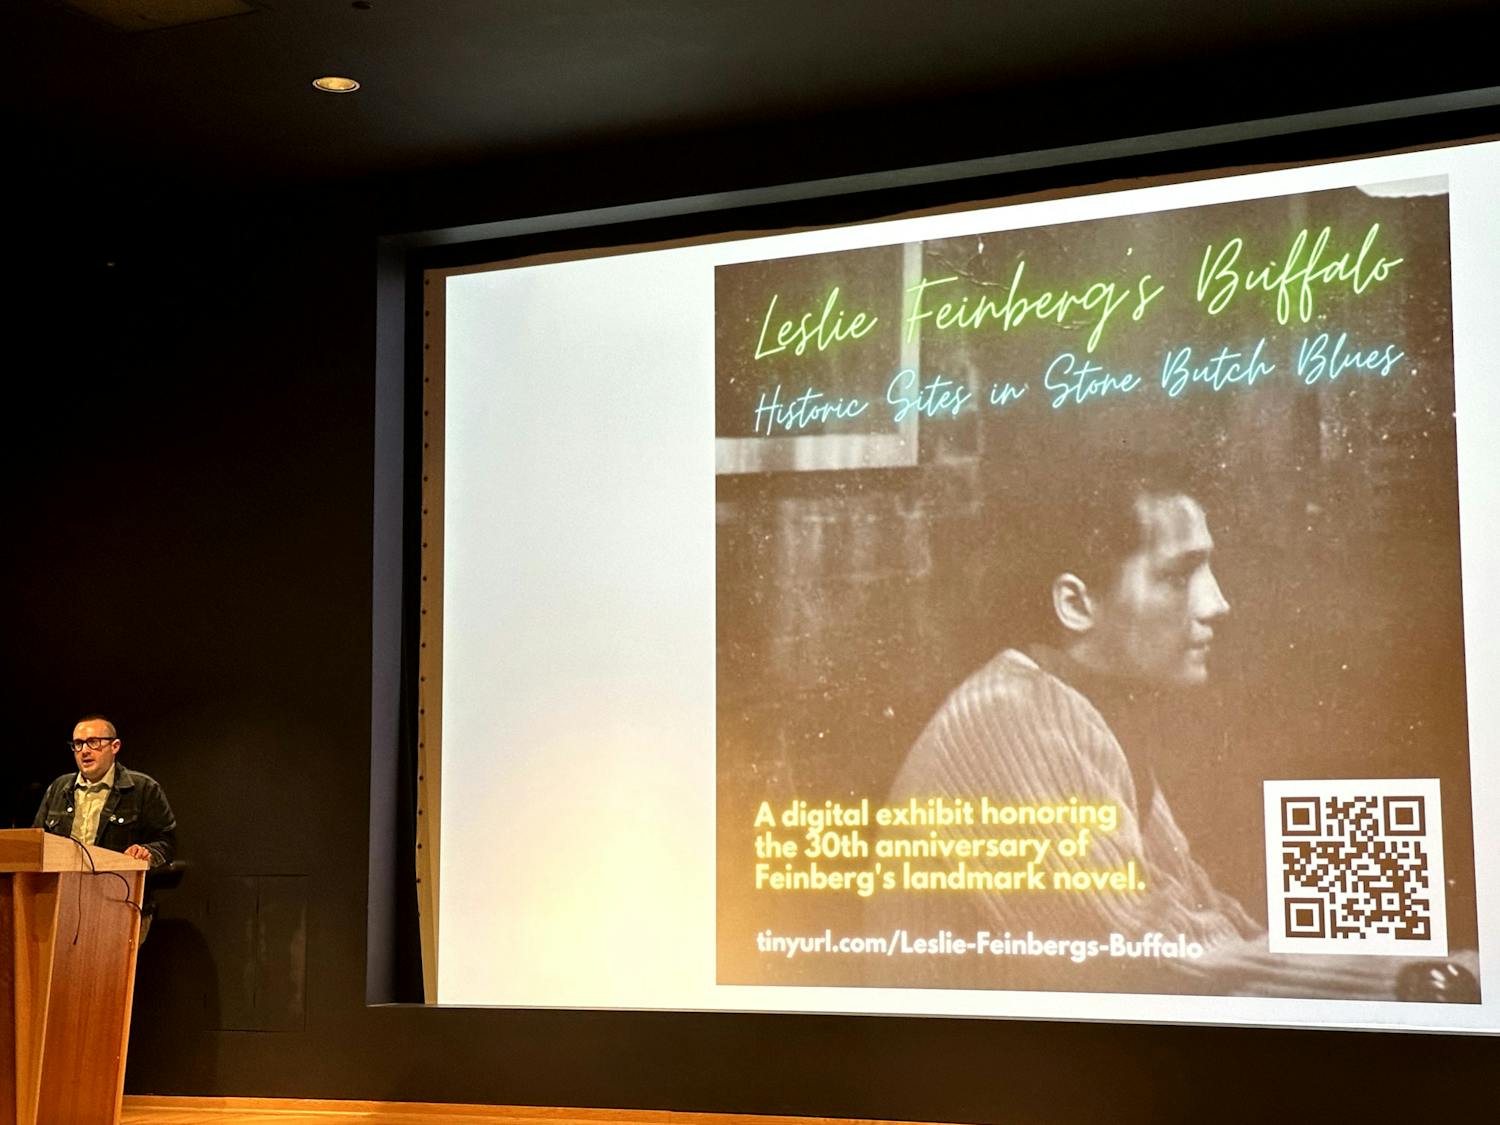 Jeff Iovannone presents his latest project, “Leslie Feinberg’s Buffalo” at UB.